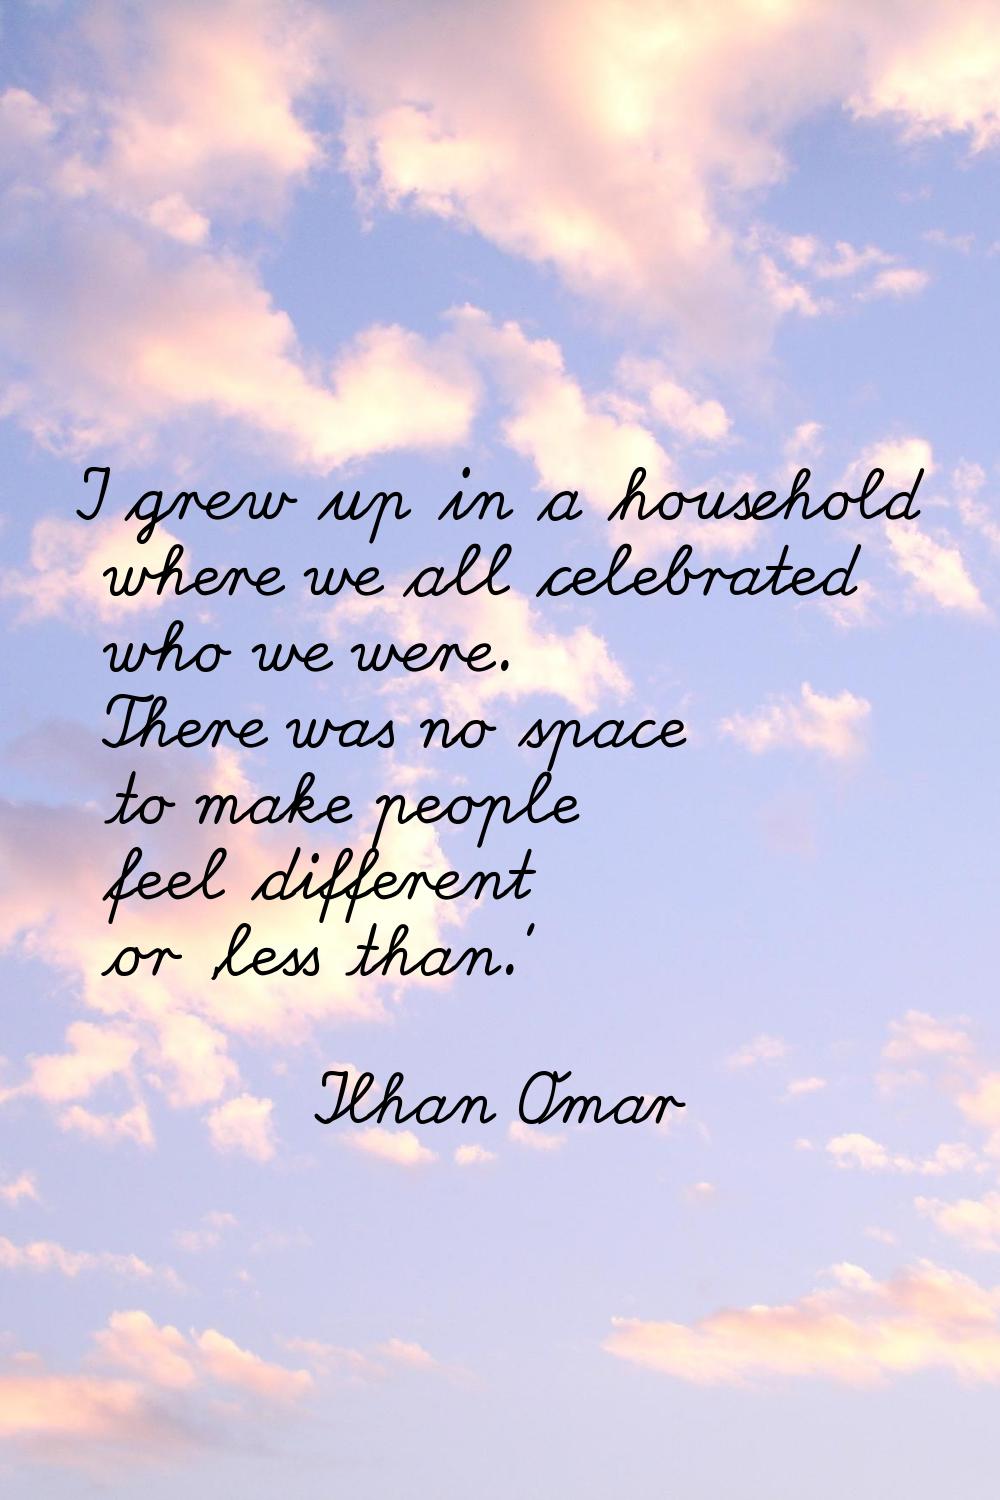 I grew up in a household where we all celebrated who we were. There was no space to make people fee